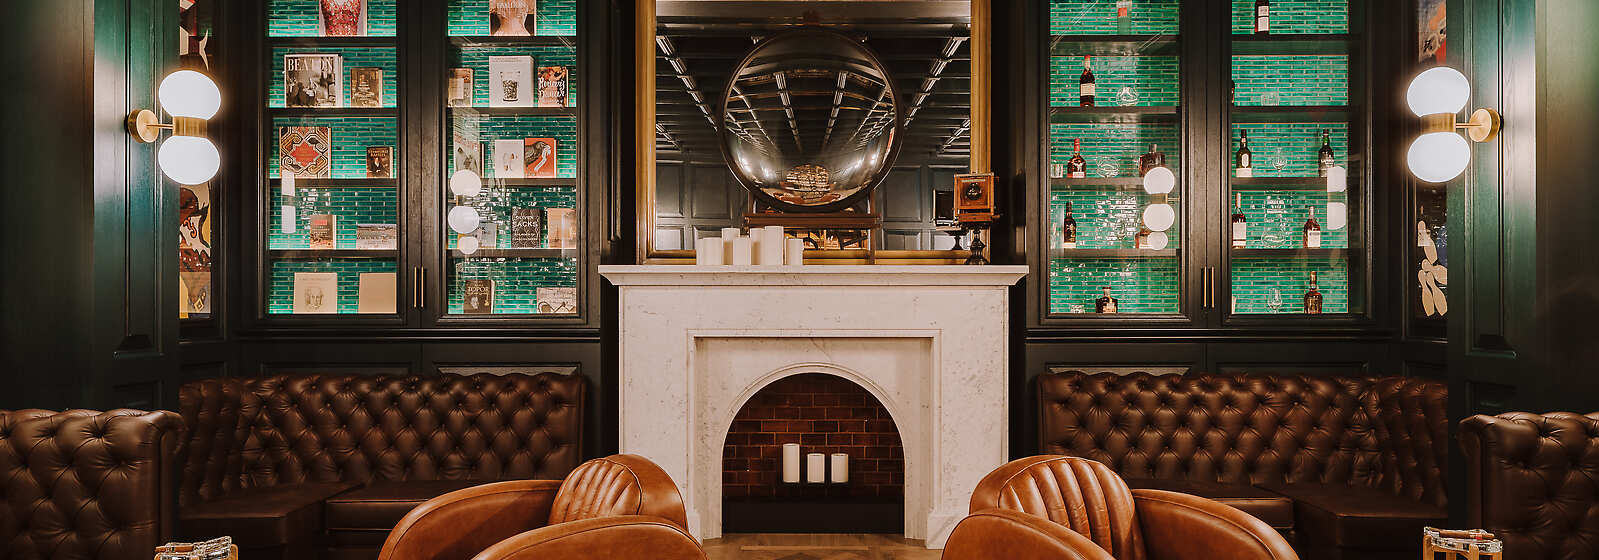 This 16-seat lounge is a unique meeting place and sanctuary for cigar lovers and connoisseurs of single malts, brandies and Armagnac.